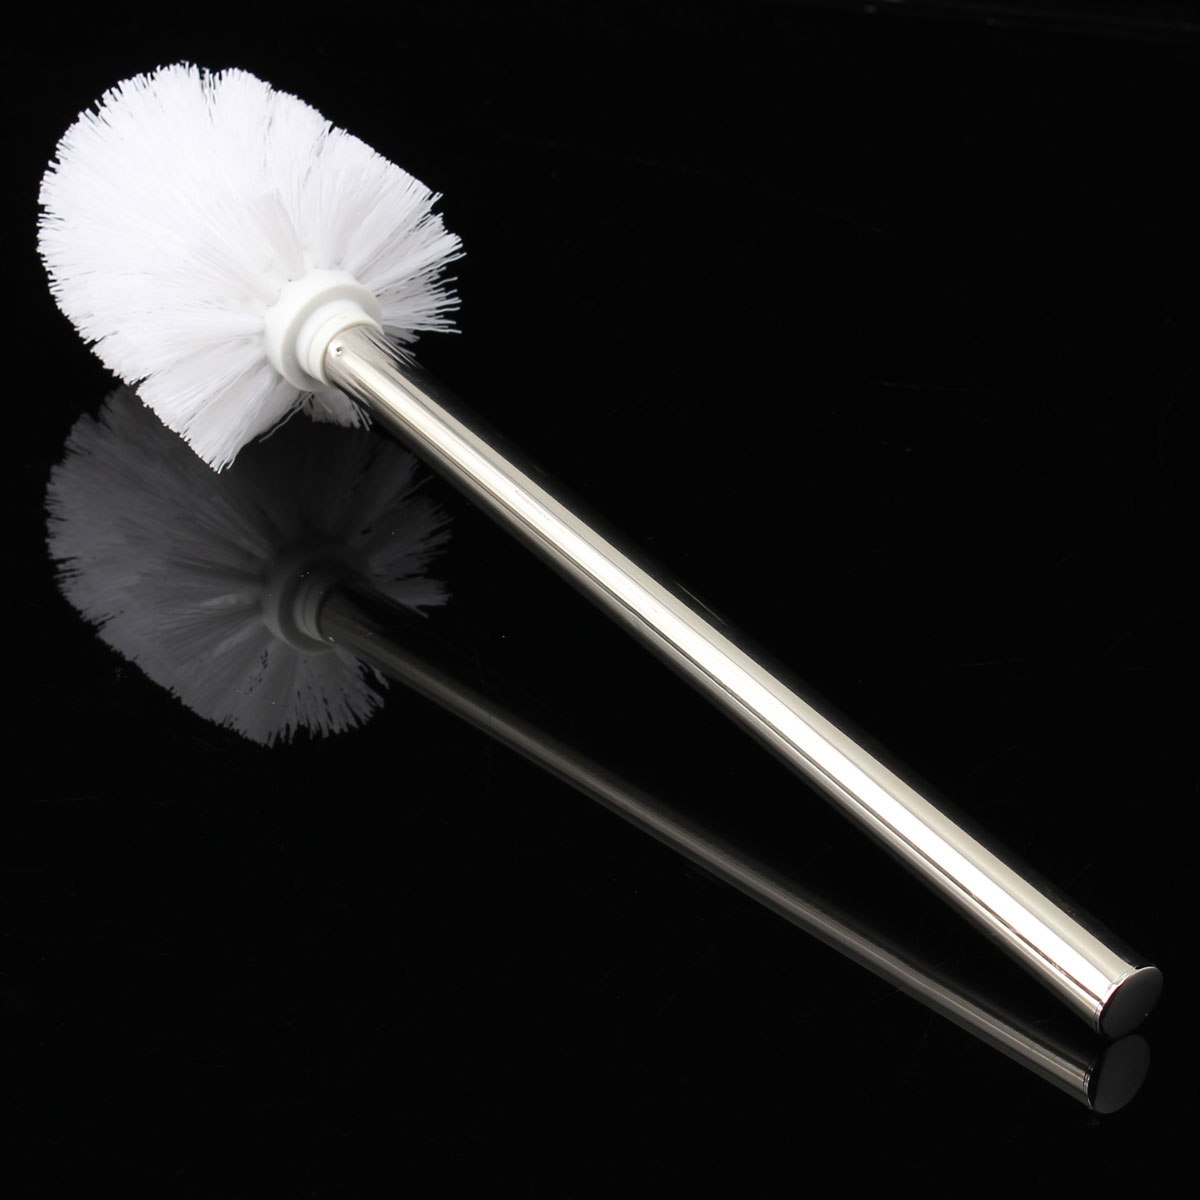 Stainless-Steel-WC-Bathroom-Cleaning-Toilet-Brush-White-Head-Holders-Cleaning-Brushes-1137680-4